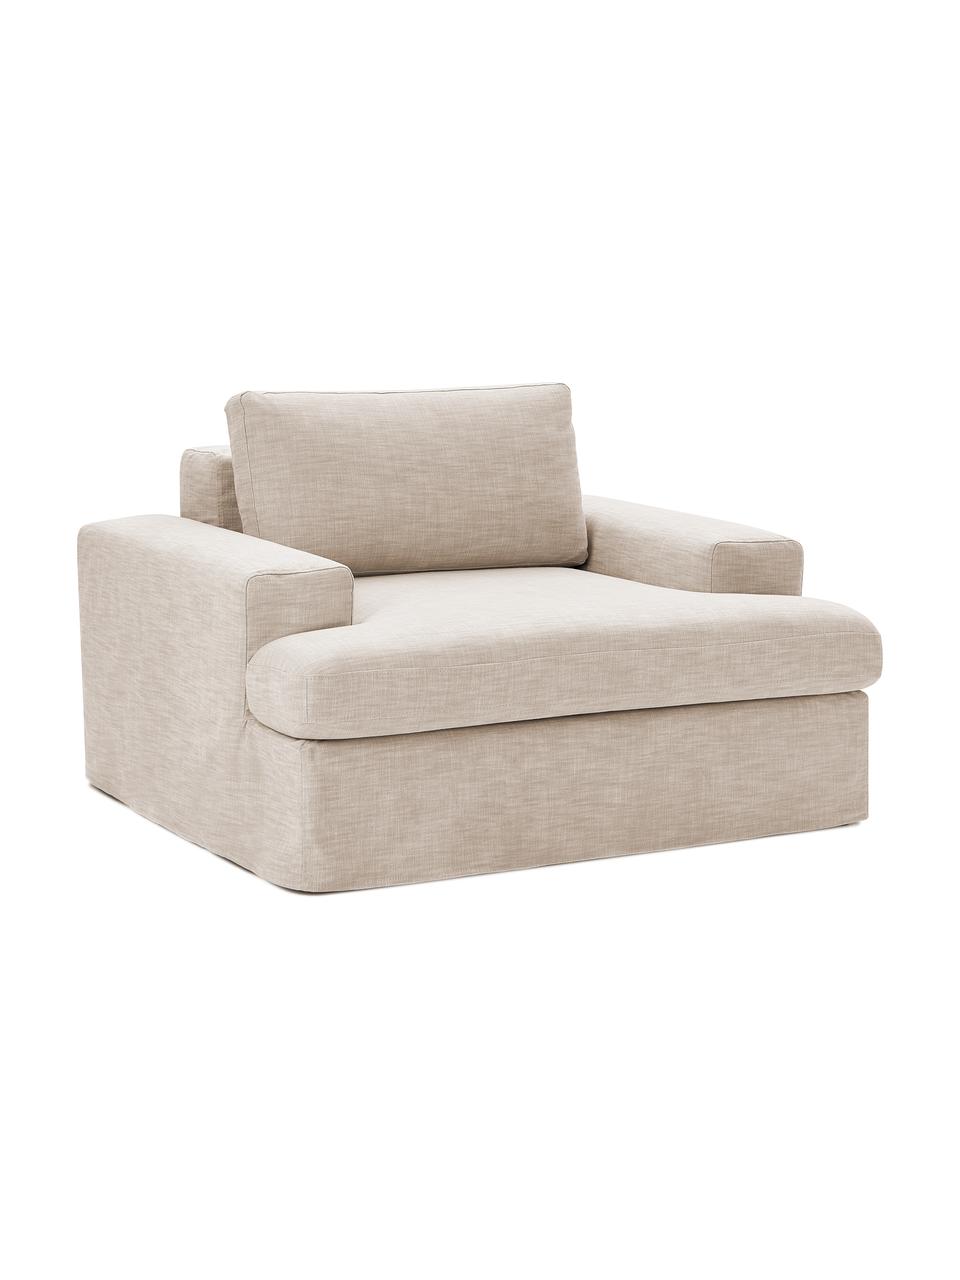 Fauteuil taupe Russell, Tissu taupe, larg. 103 x haut. 77 cm